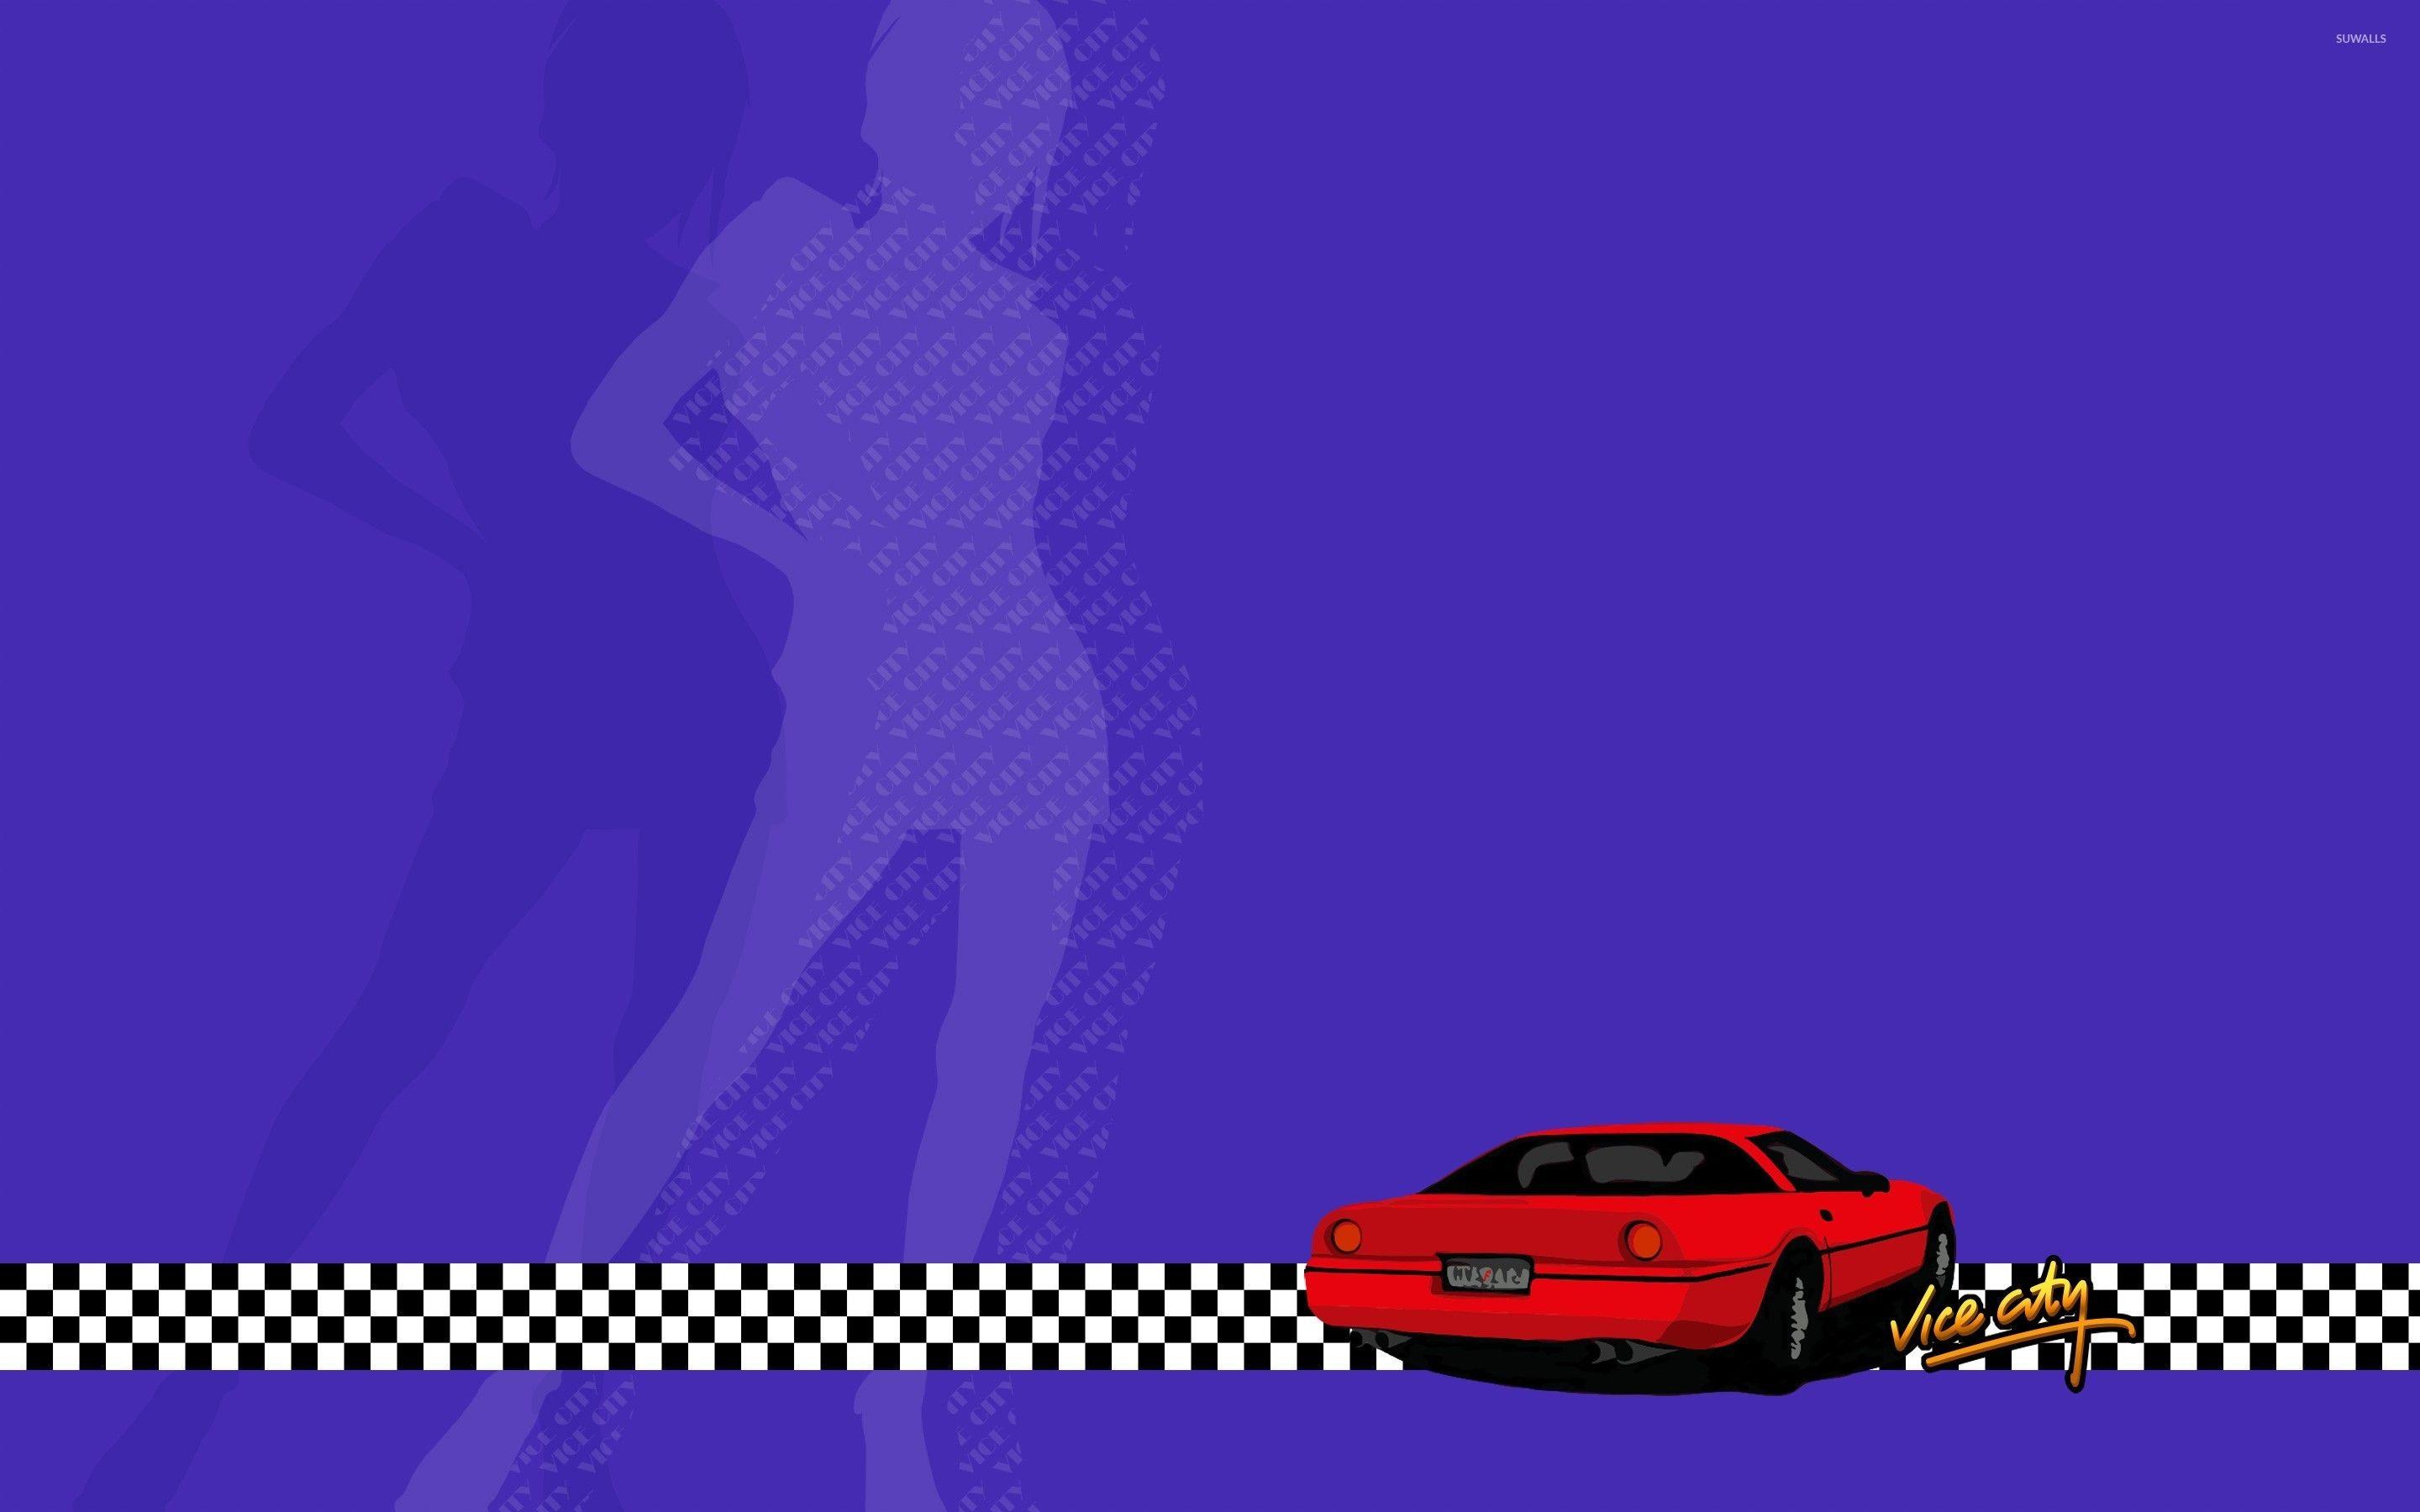 Red car in Grand Theft Auto: Vice City wallpaper wallpaper